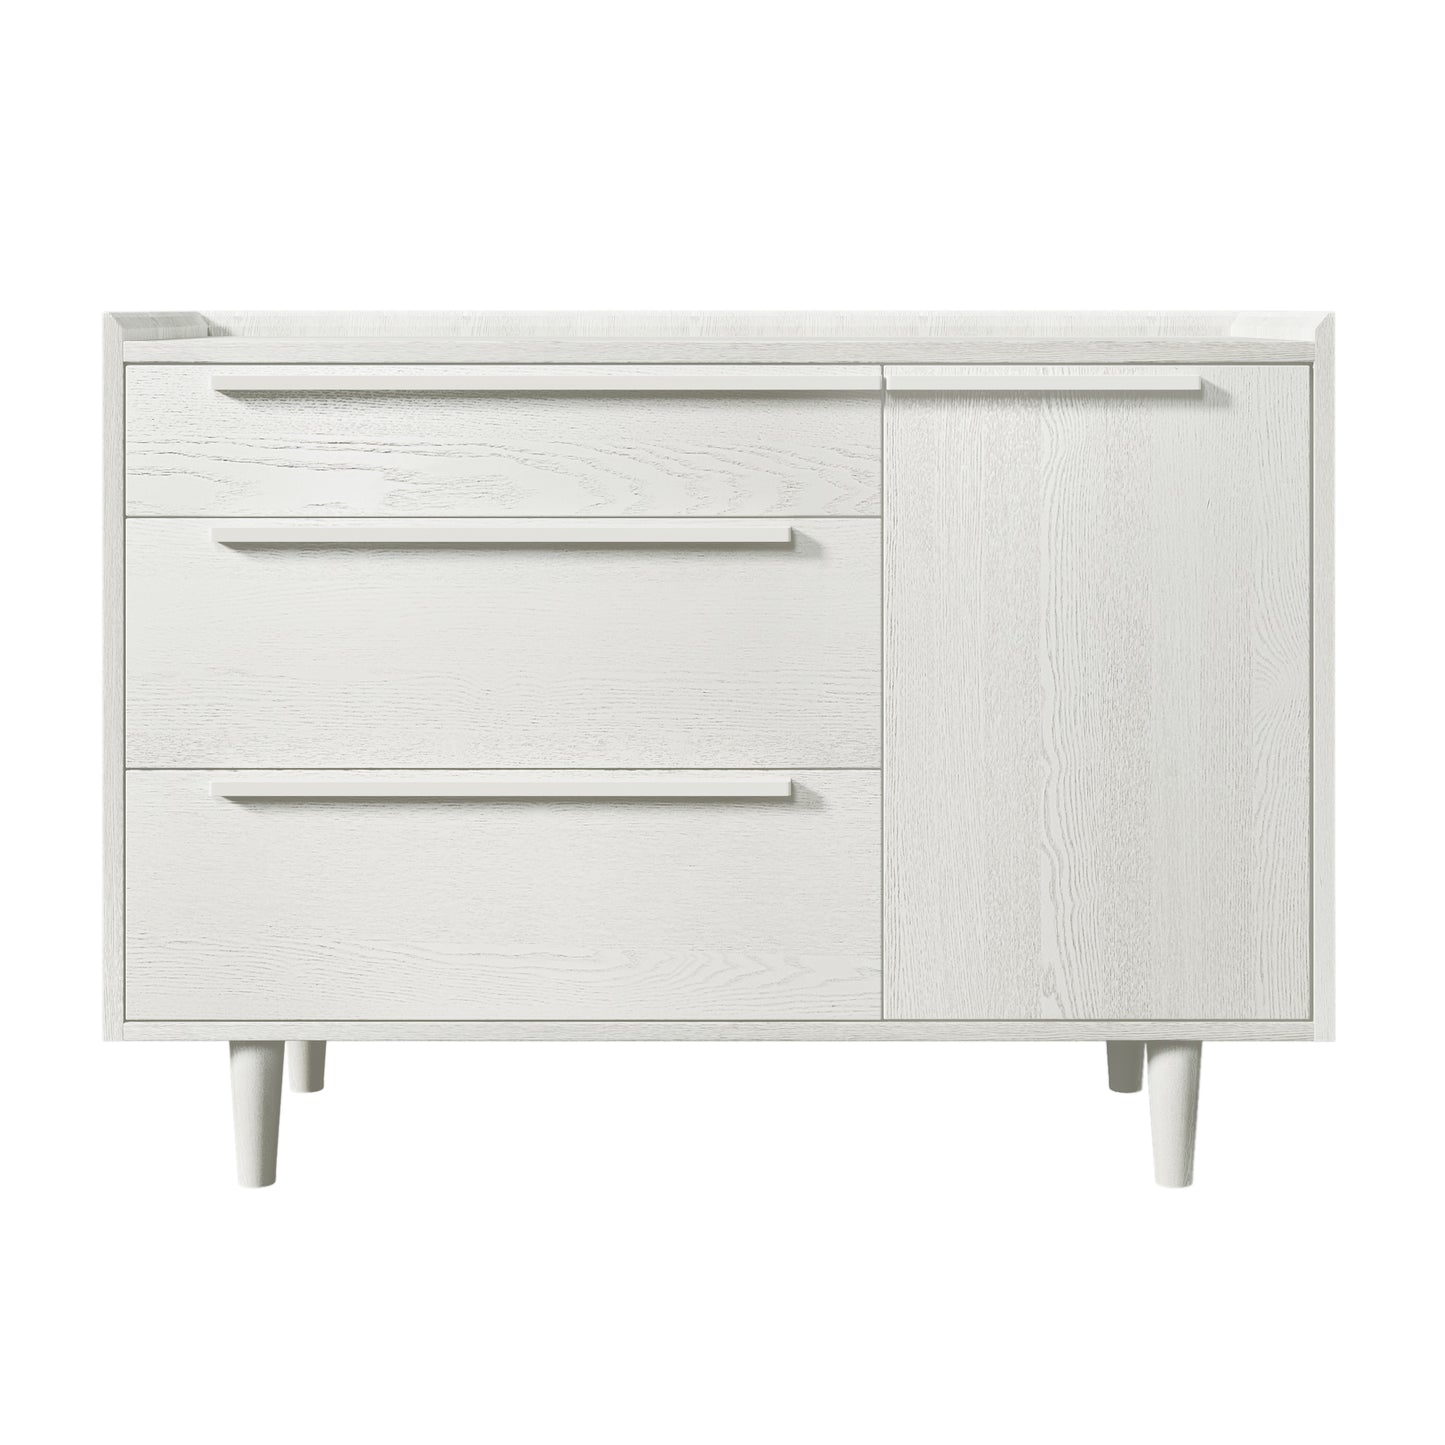 Modern Wood Grain Sideboard with 3 Drawers Storage Cabinet Entryway Floor Cabinet Sideboard Dresser with Solid Wood Legs for bedroom and living room, Grain White